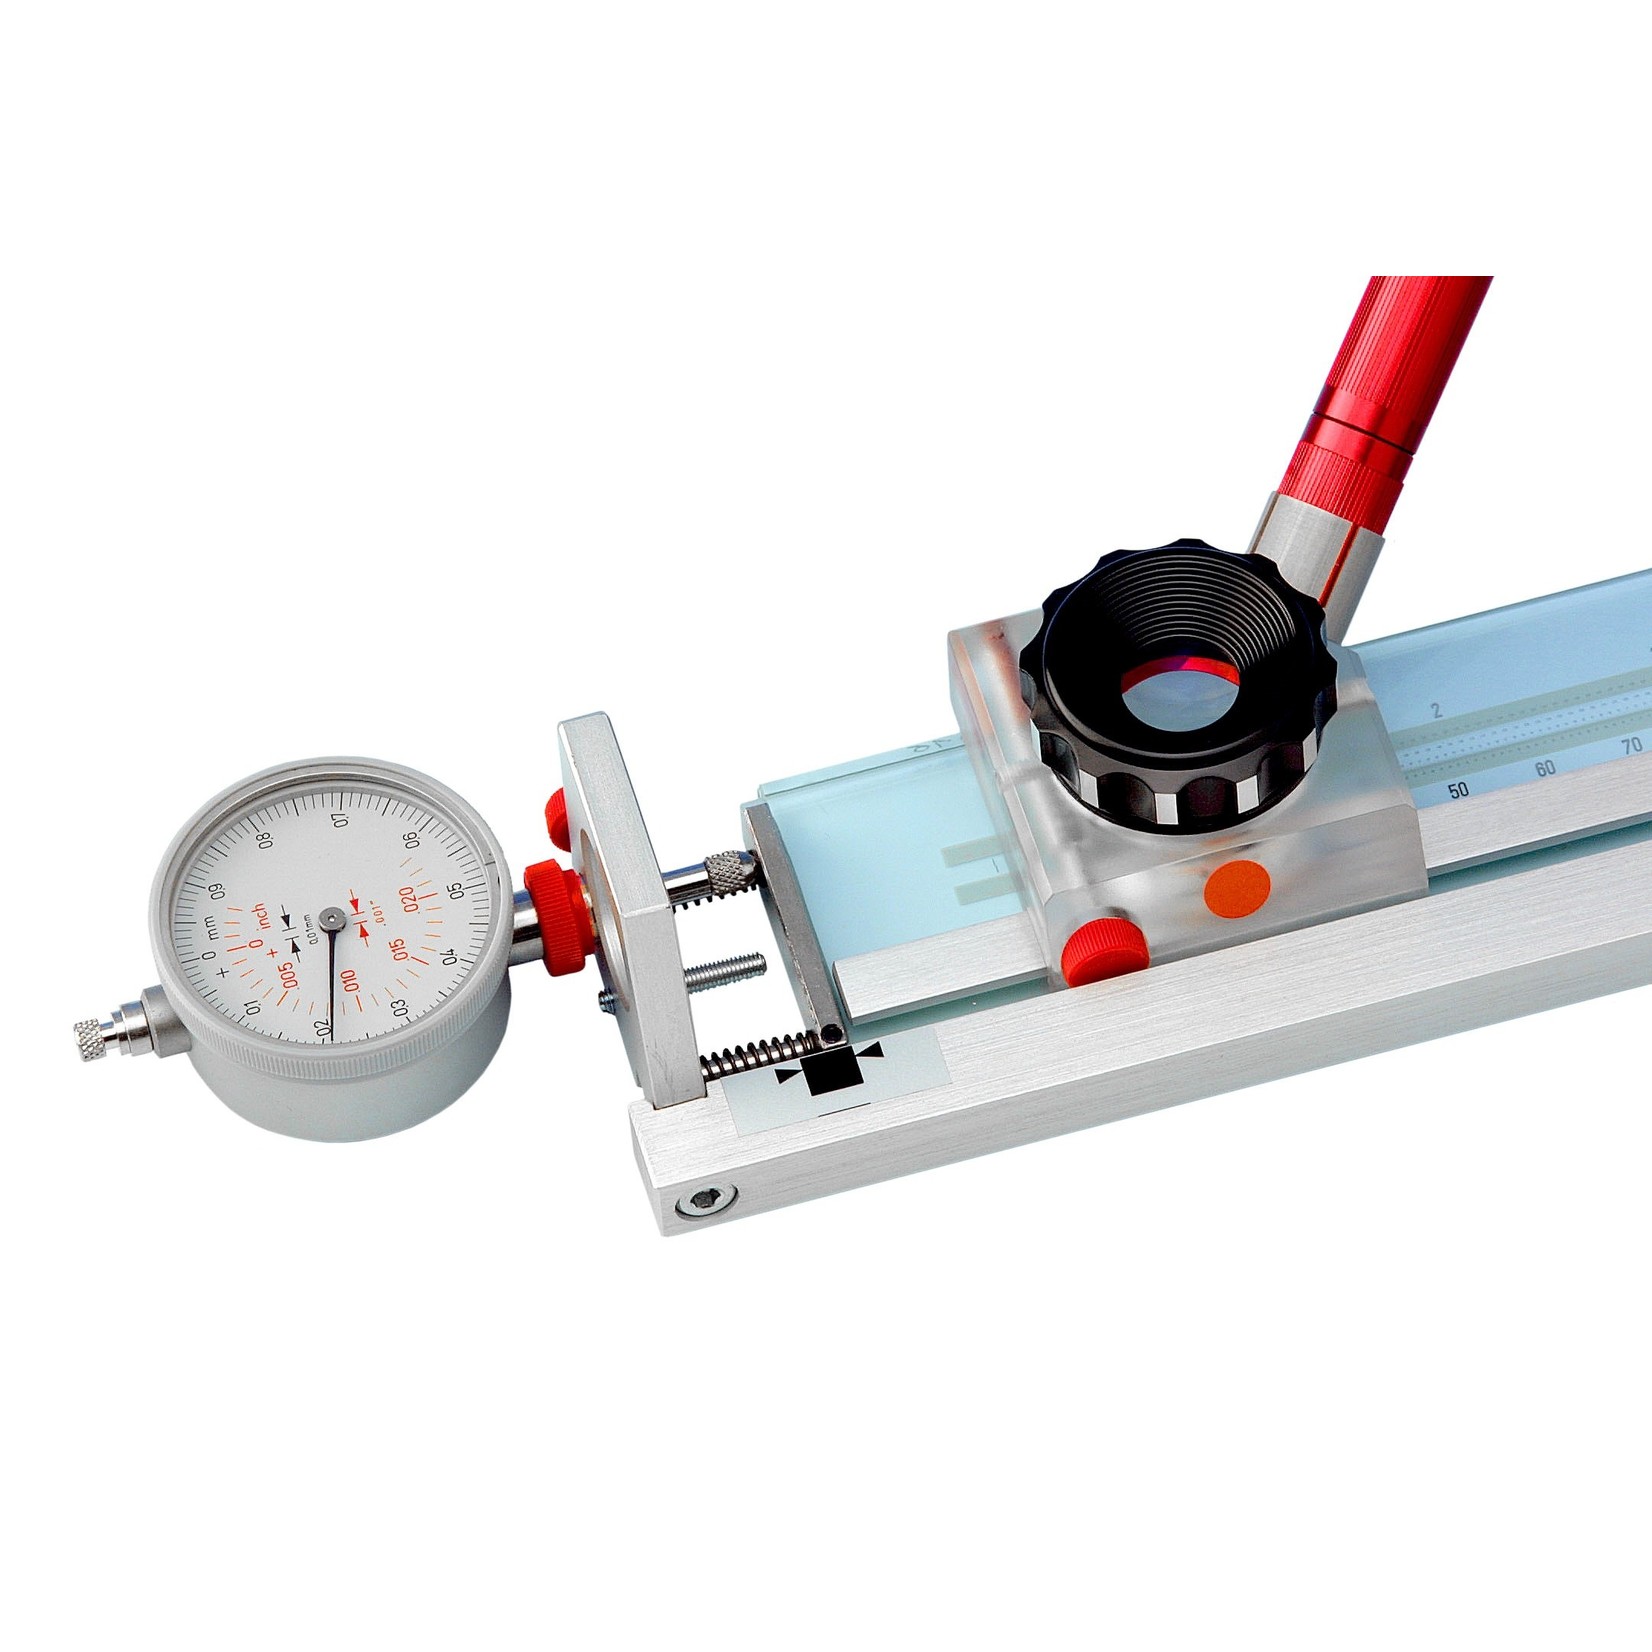 The precision glass measuring rod with additional dial gauge